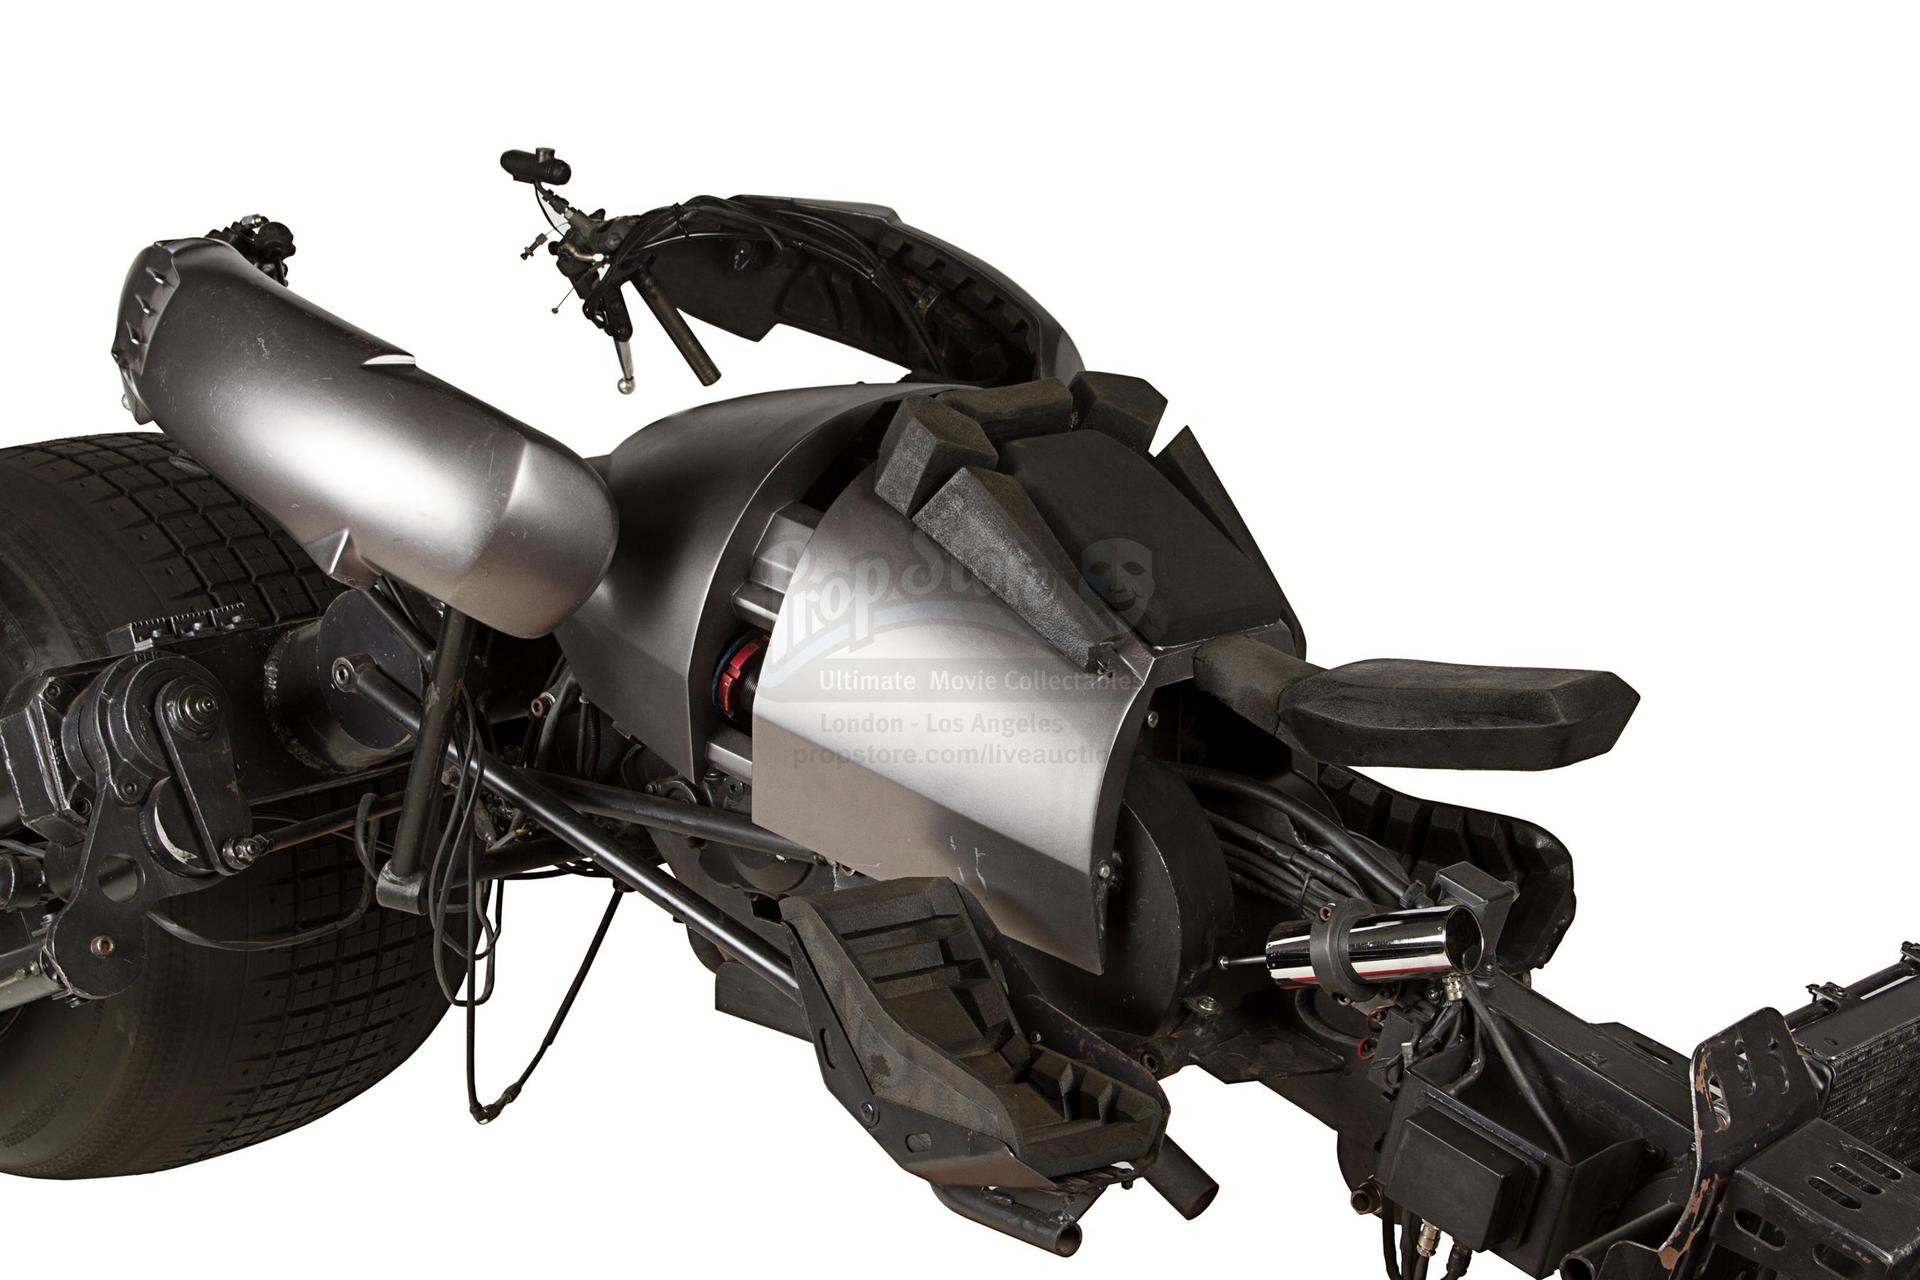 dark-knight-trilogys-batpod-motorcycle-is-up-for-auction_2